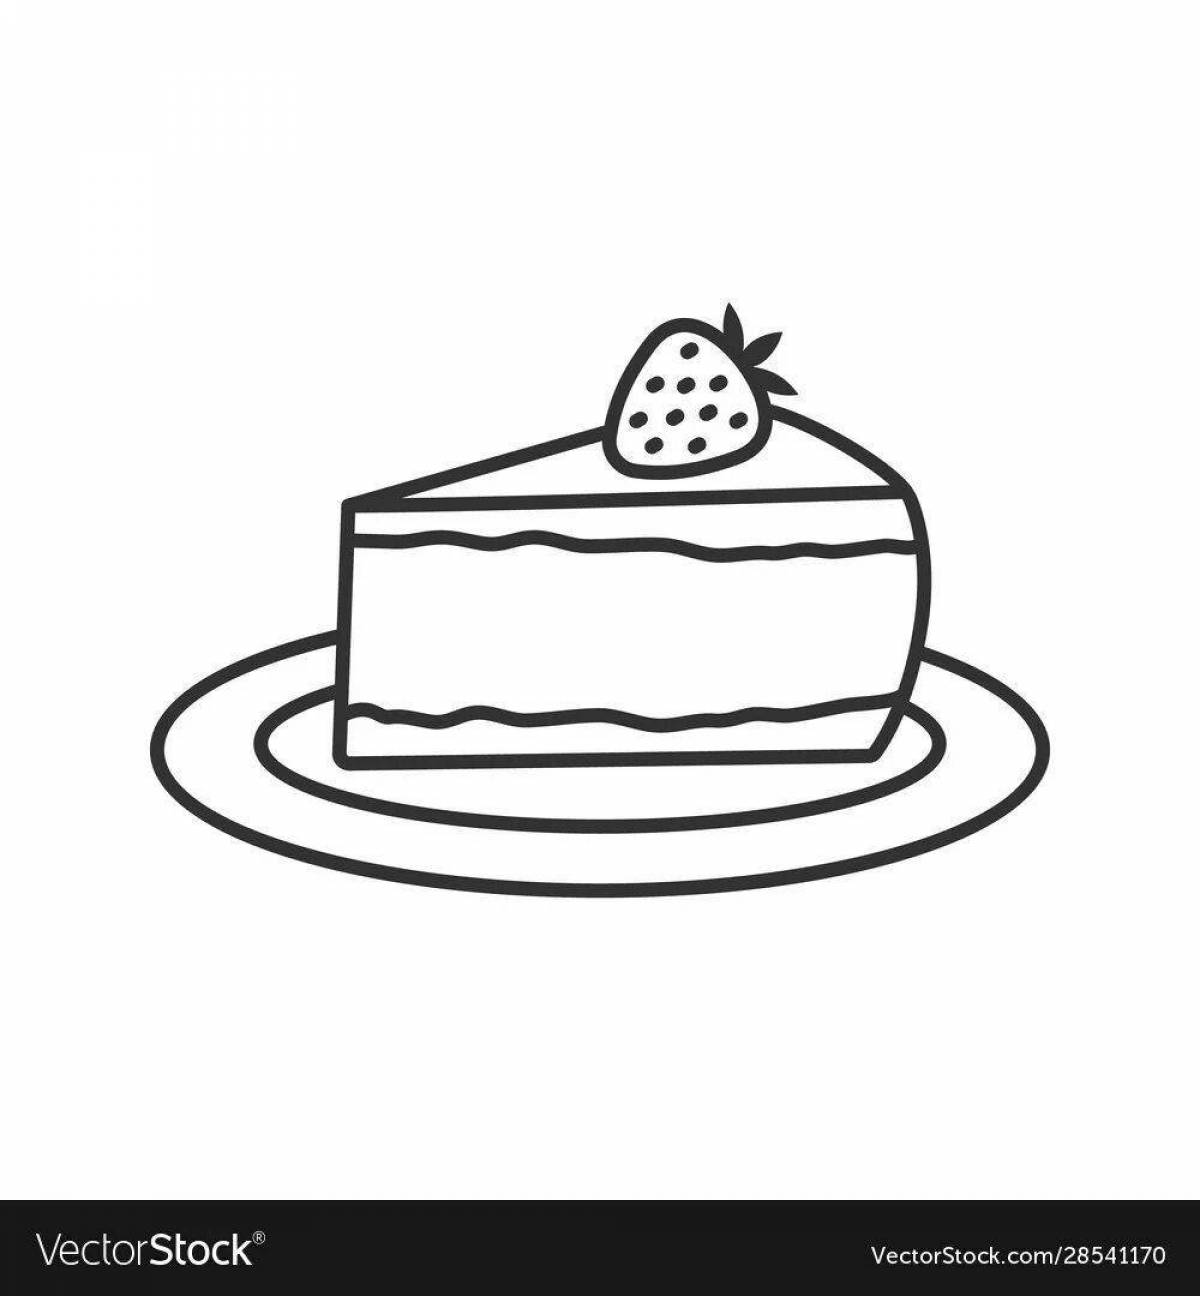 Cheesecake adorable coloring page